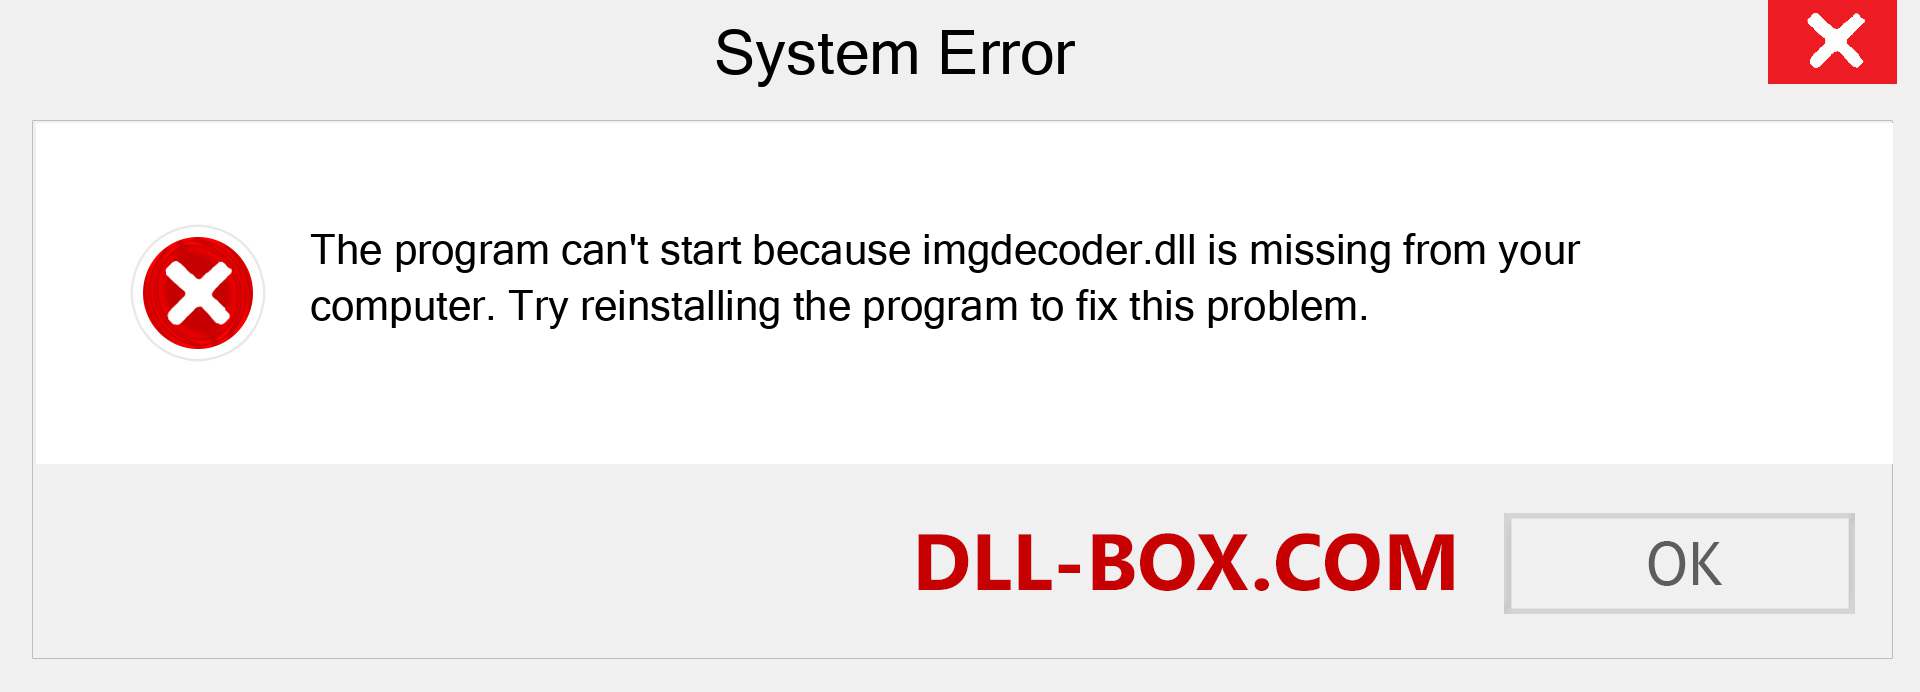  imgdecoder.dll file is missing?. Download for Windows 7, 8, 10 - Fix  imgdecoder dll Missing Error on Windows, photos, images